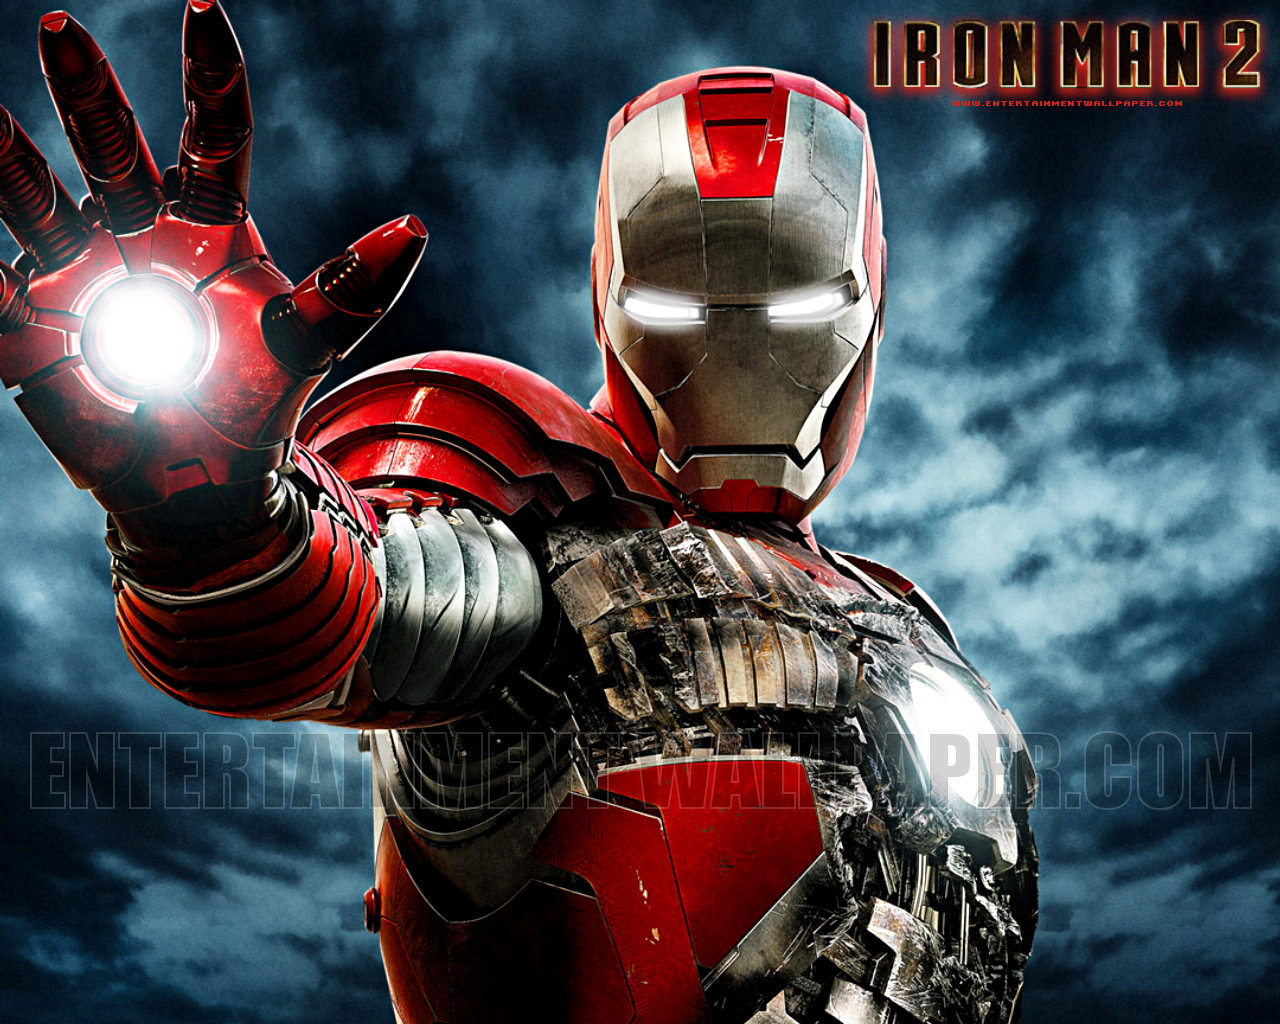 Iron Man 1 Wallpapers Group 79 A collection of the top 45 2.0 wallpapers and backgrounds available for download for free. iron man 1 wallpapers group 79